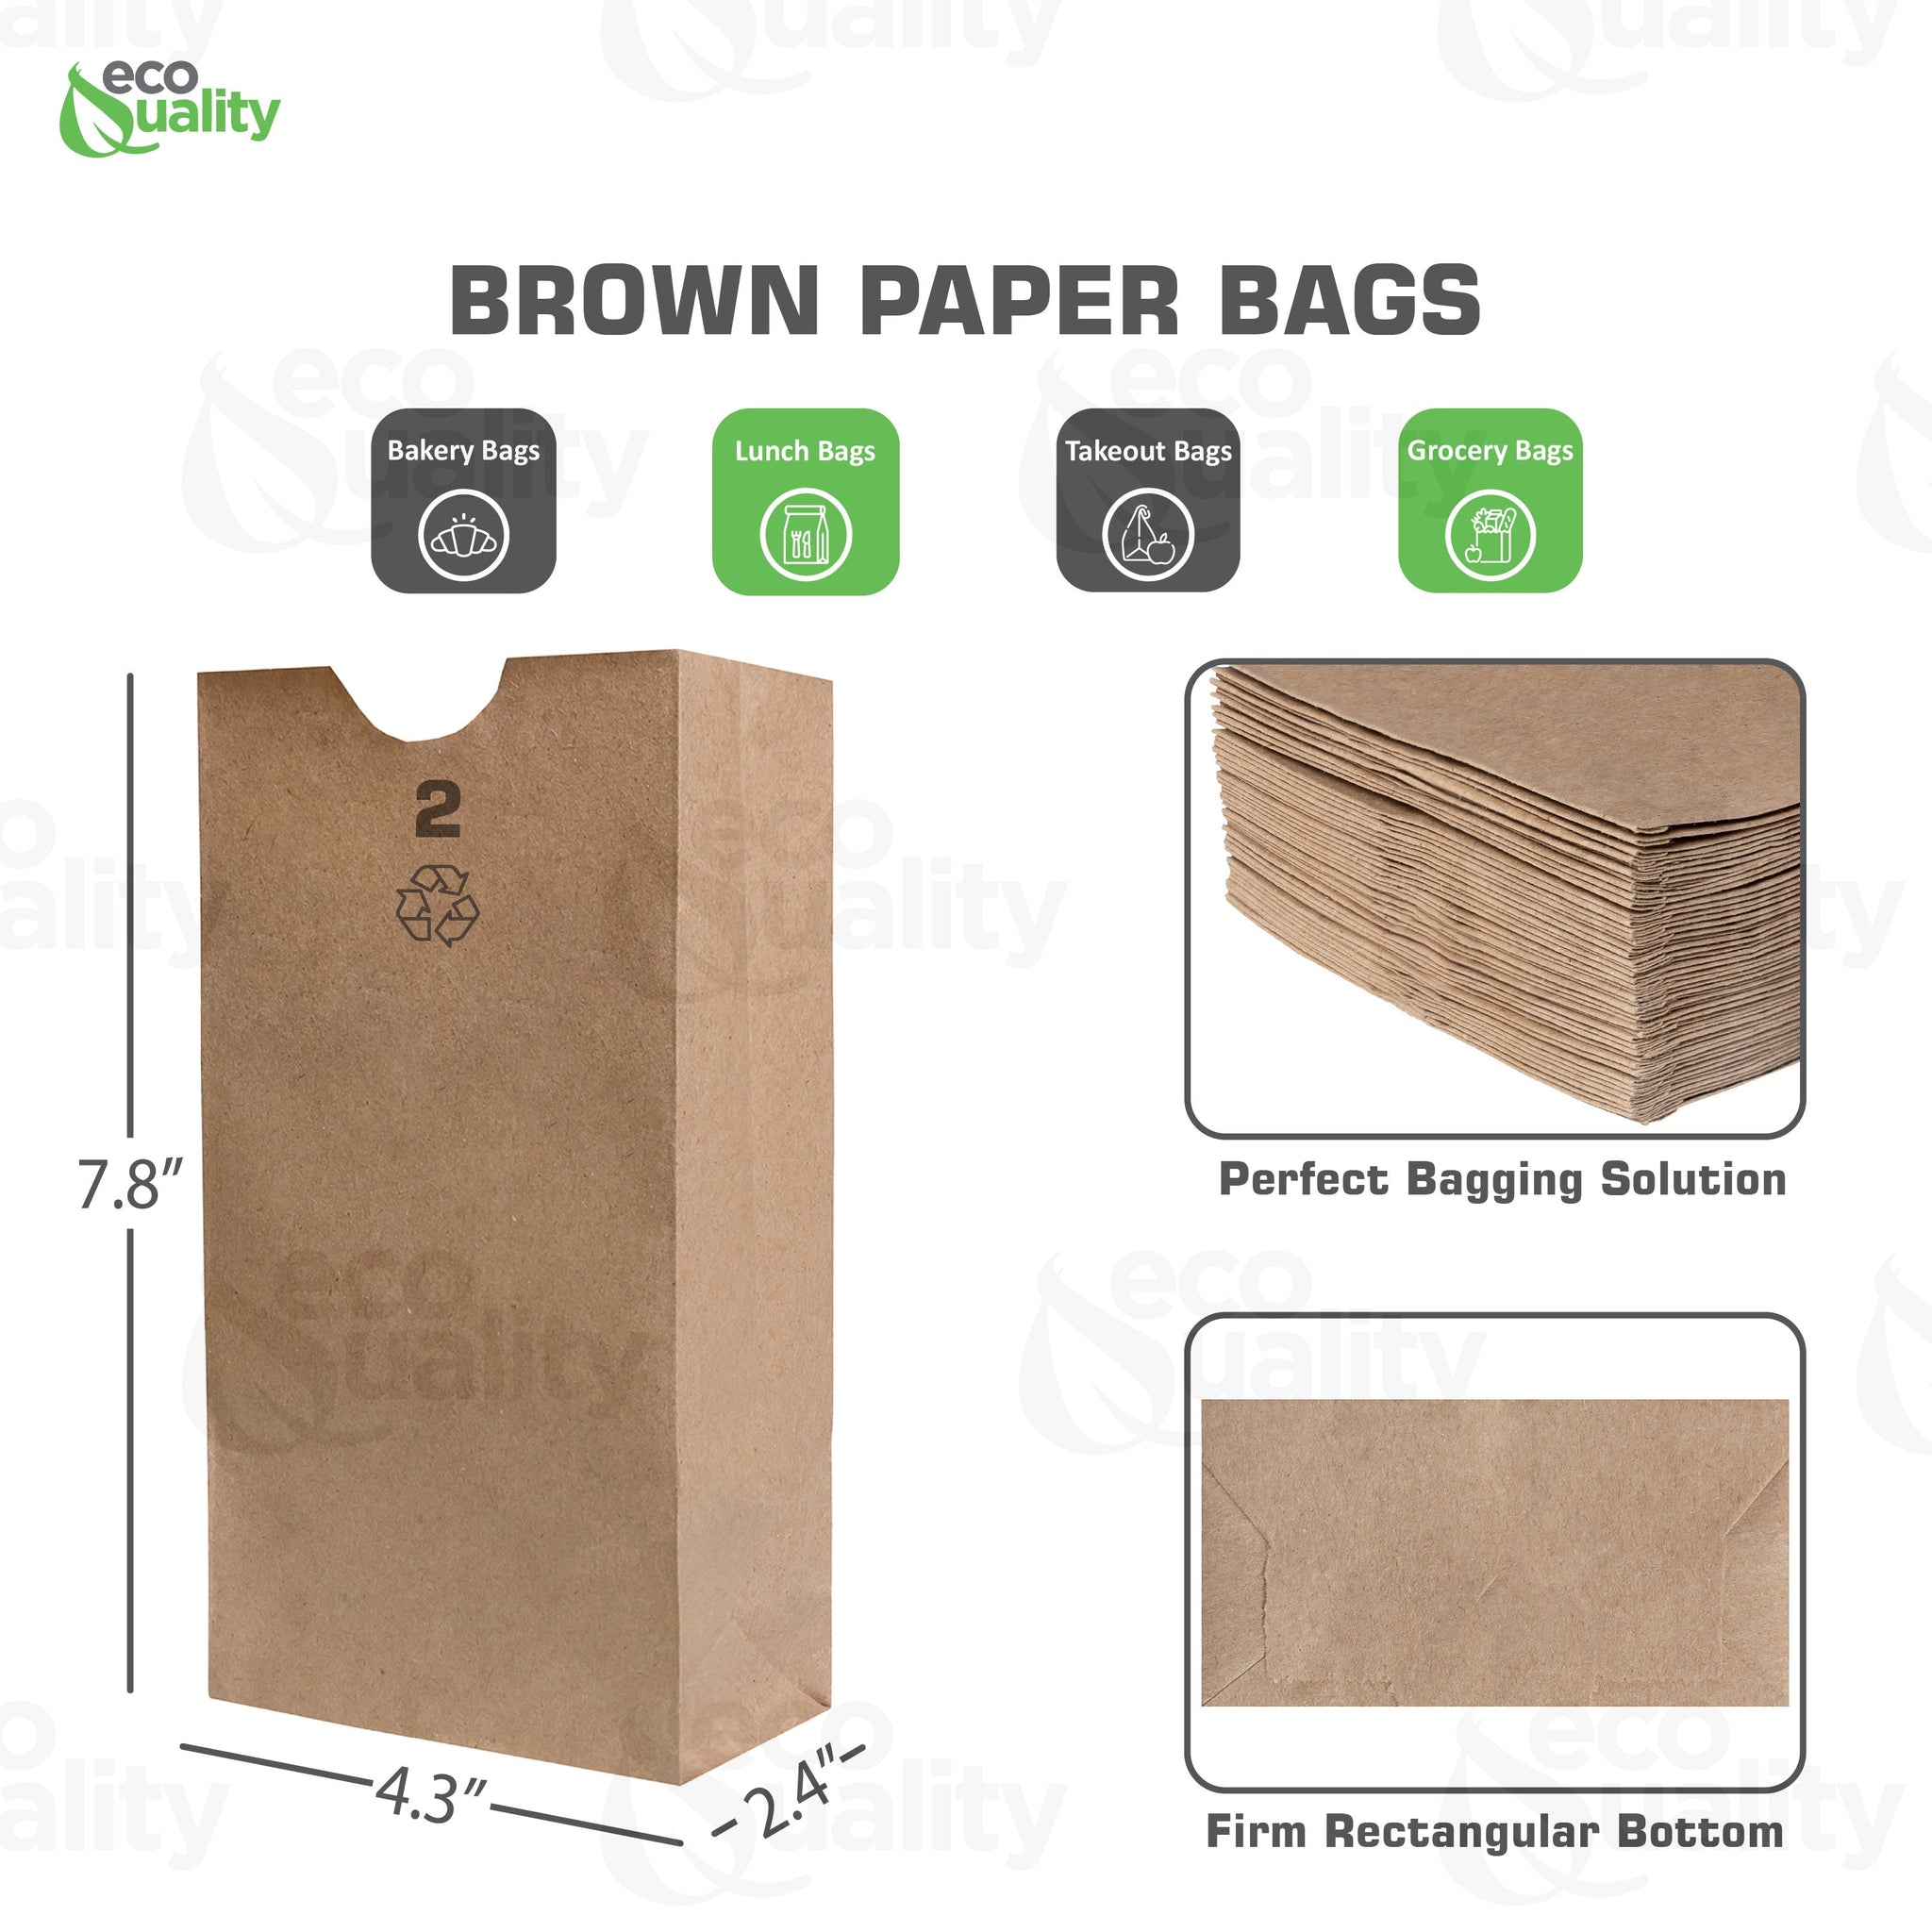 2 pound disposable bag brown Paper Bags white Paper Shopping Bags foldable paper bag catering bags brown kraft paper bag 2 pound candy bag snack bag gift bags DIY Bags arts and craft Sandwich Bag party favor bag lunch bag togo bag takeout bag Restaurant supplies paper bags Kraft Paper Bags kraft grocery bags Household Supplies